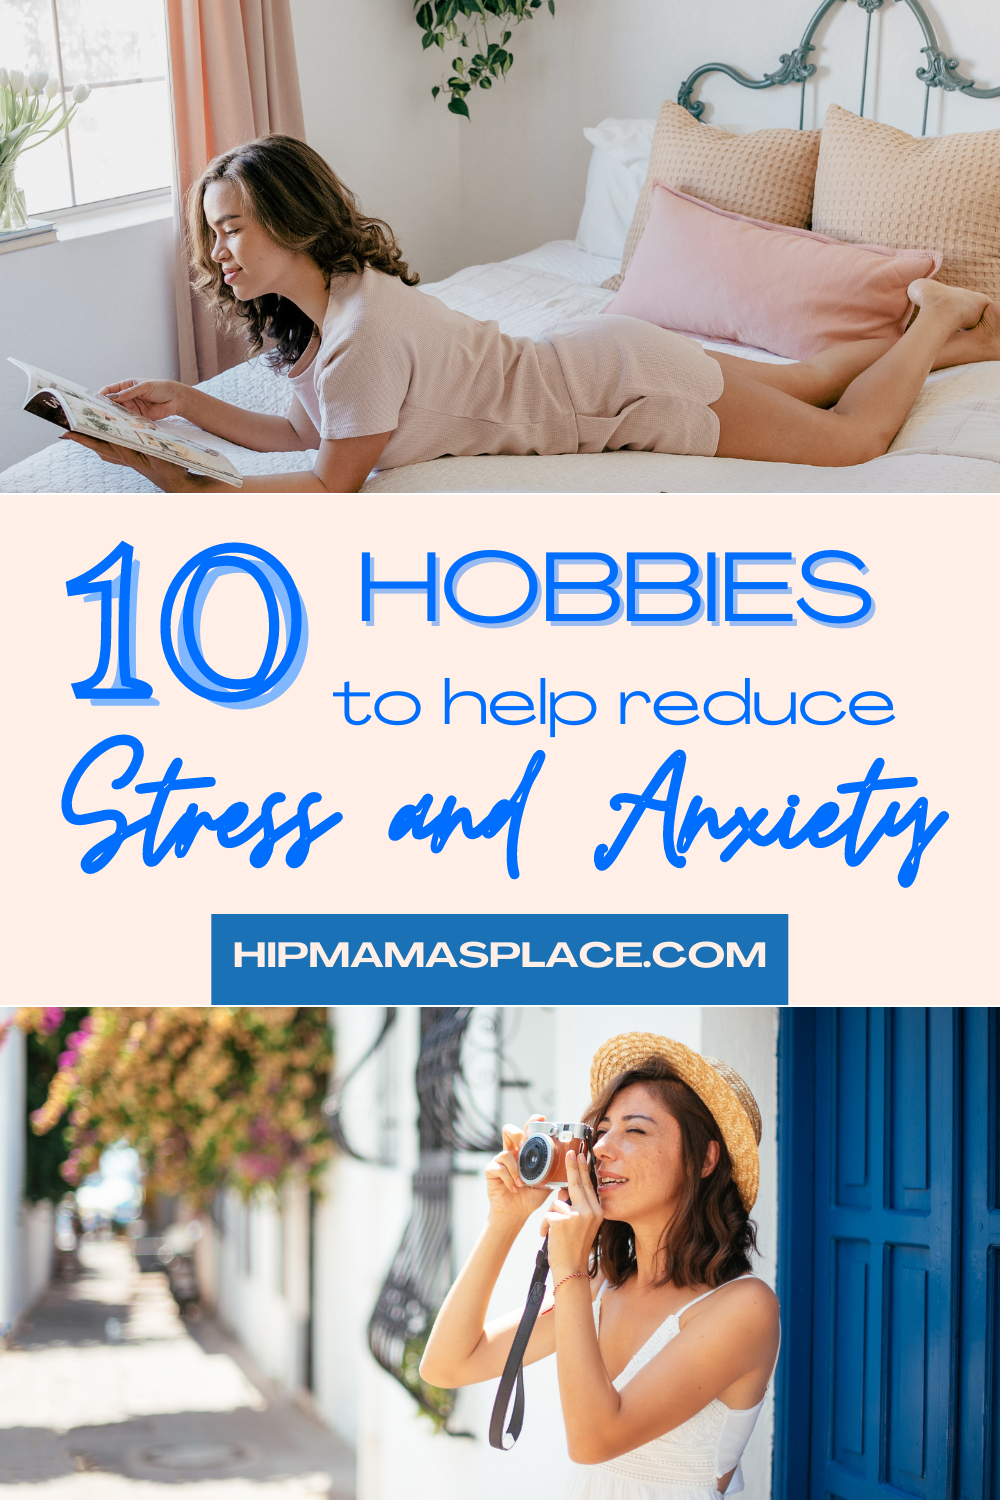 10 Hobbies To Help Reduce Stress and Anxiety